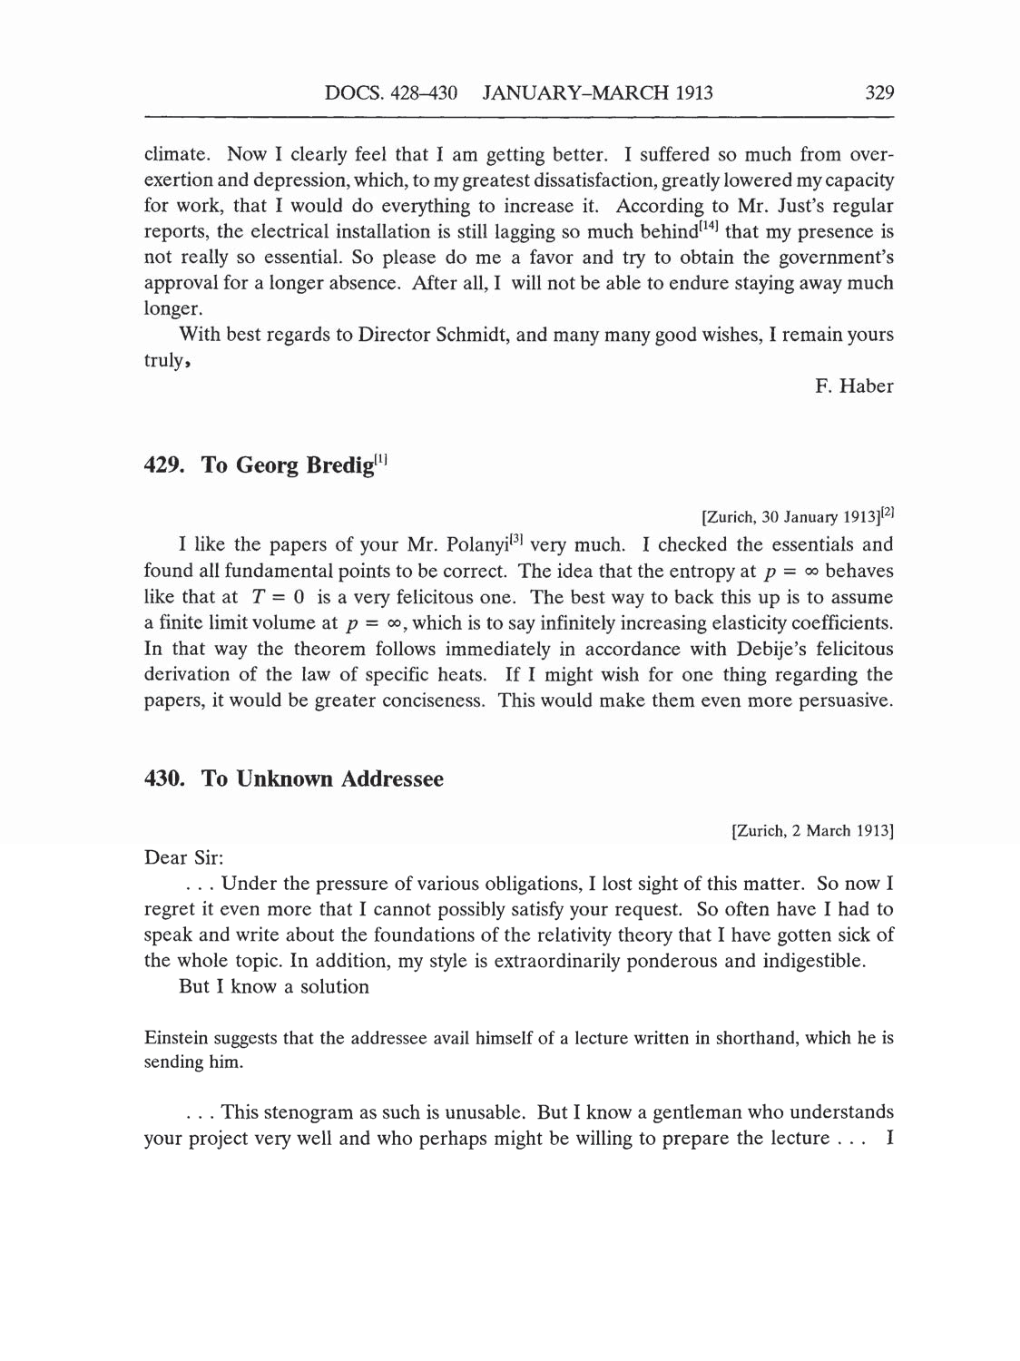 Volume 5: The Swiss Years: Correspondence, 1902-1914 (English translation supplement) page 329